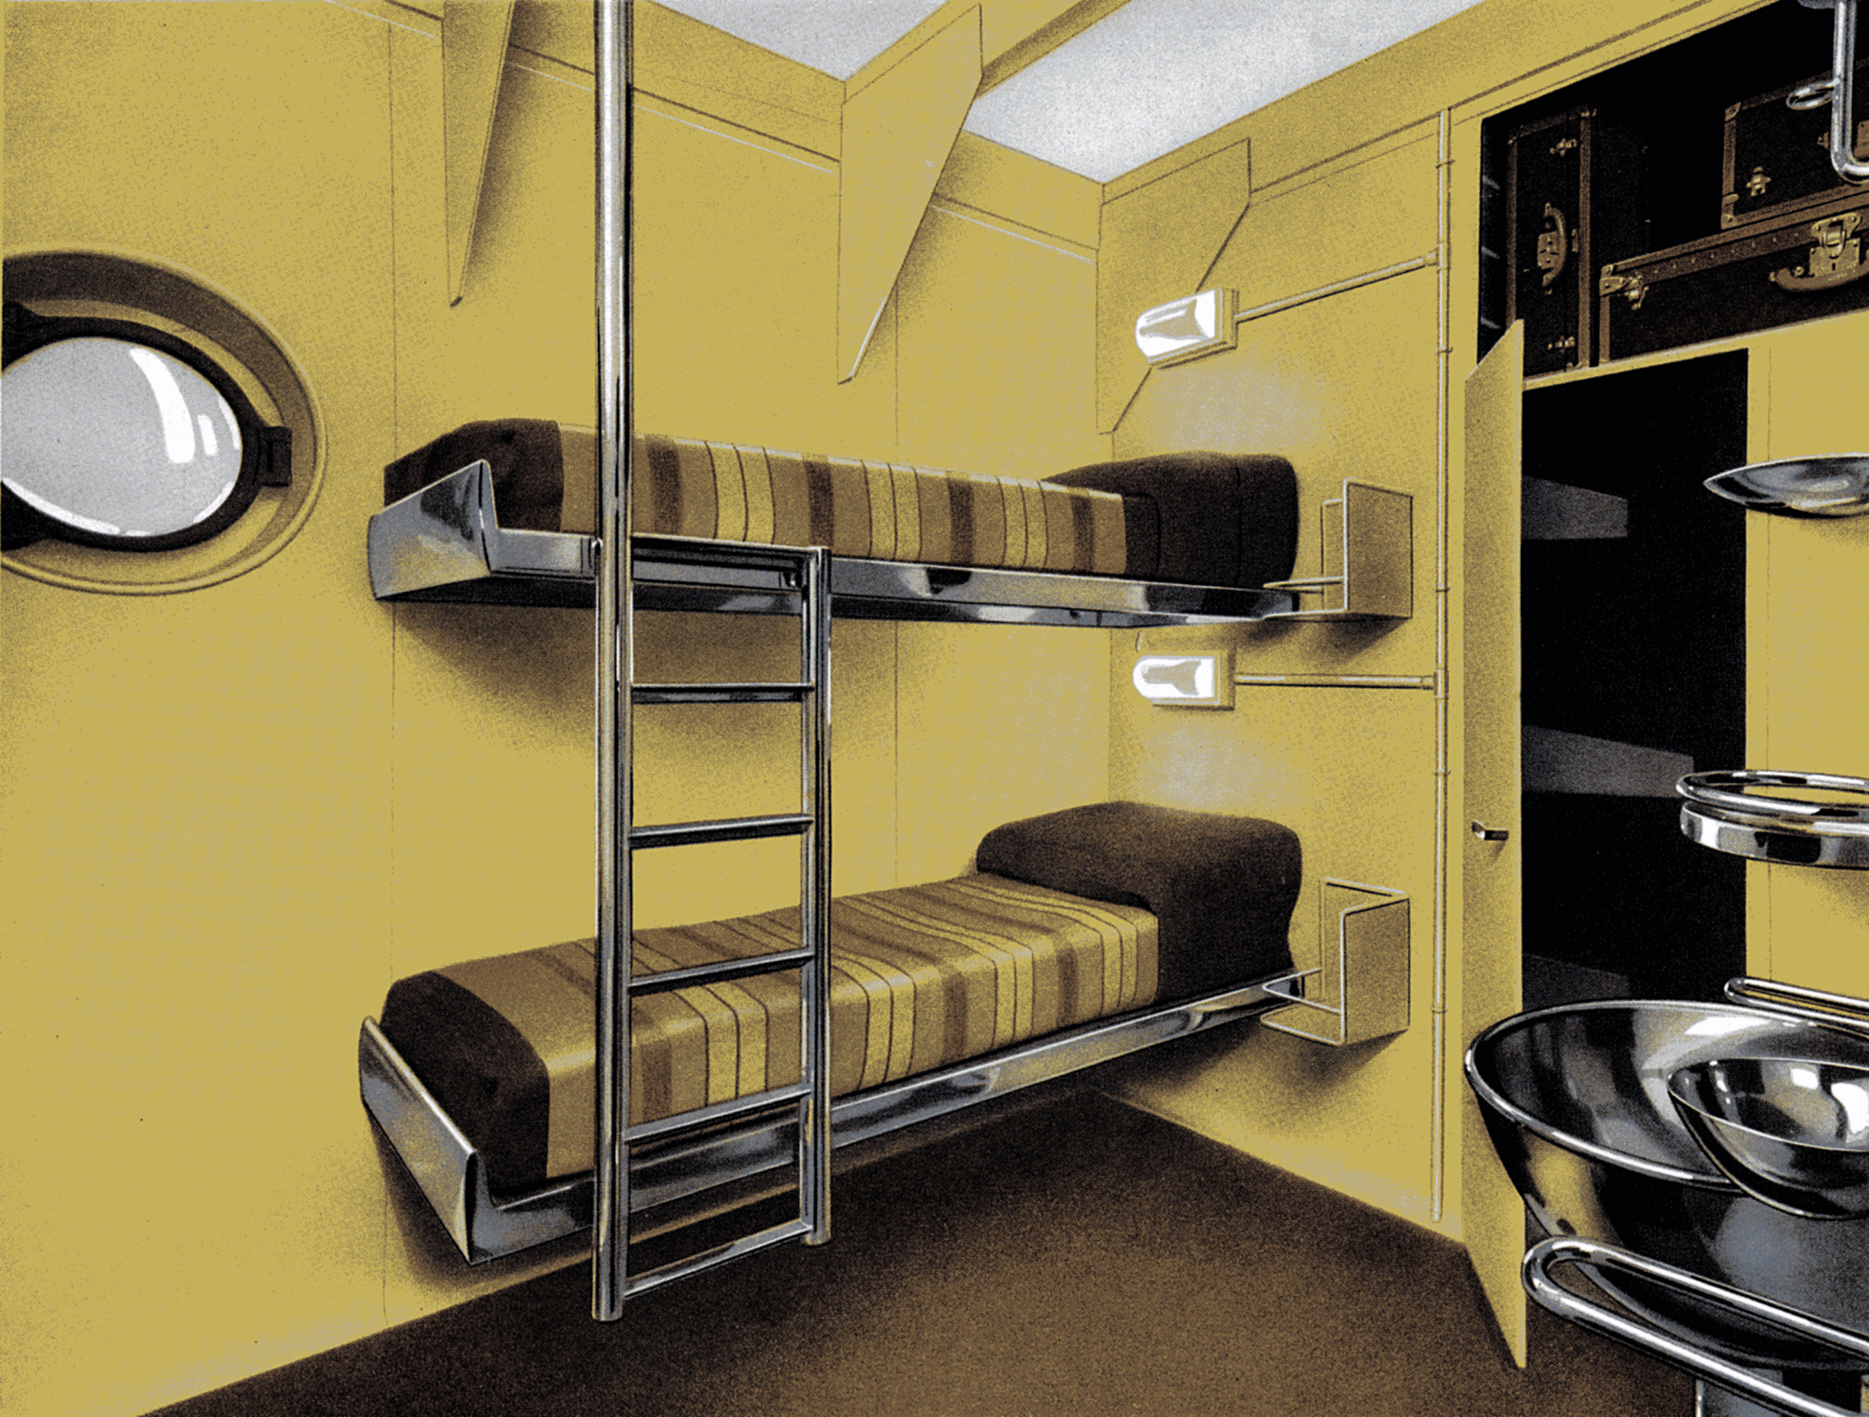 Prototype of a stainless steel houseboat cabin presented by the Ateliers Jean Prouvé (with M. Gascoin, interior design) at the Salon d’automne, Paris, 1934 (section organized by the OTUA and the UAM).